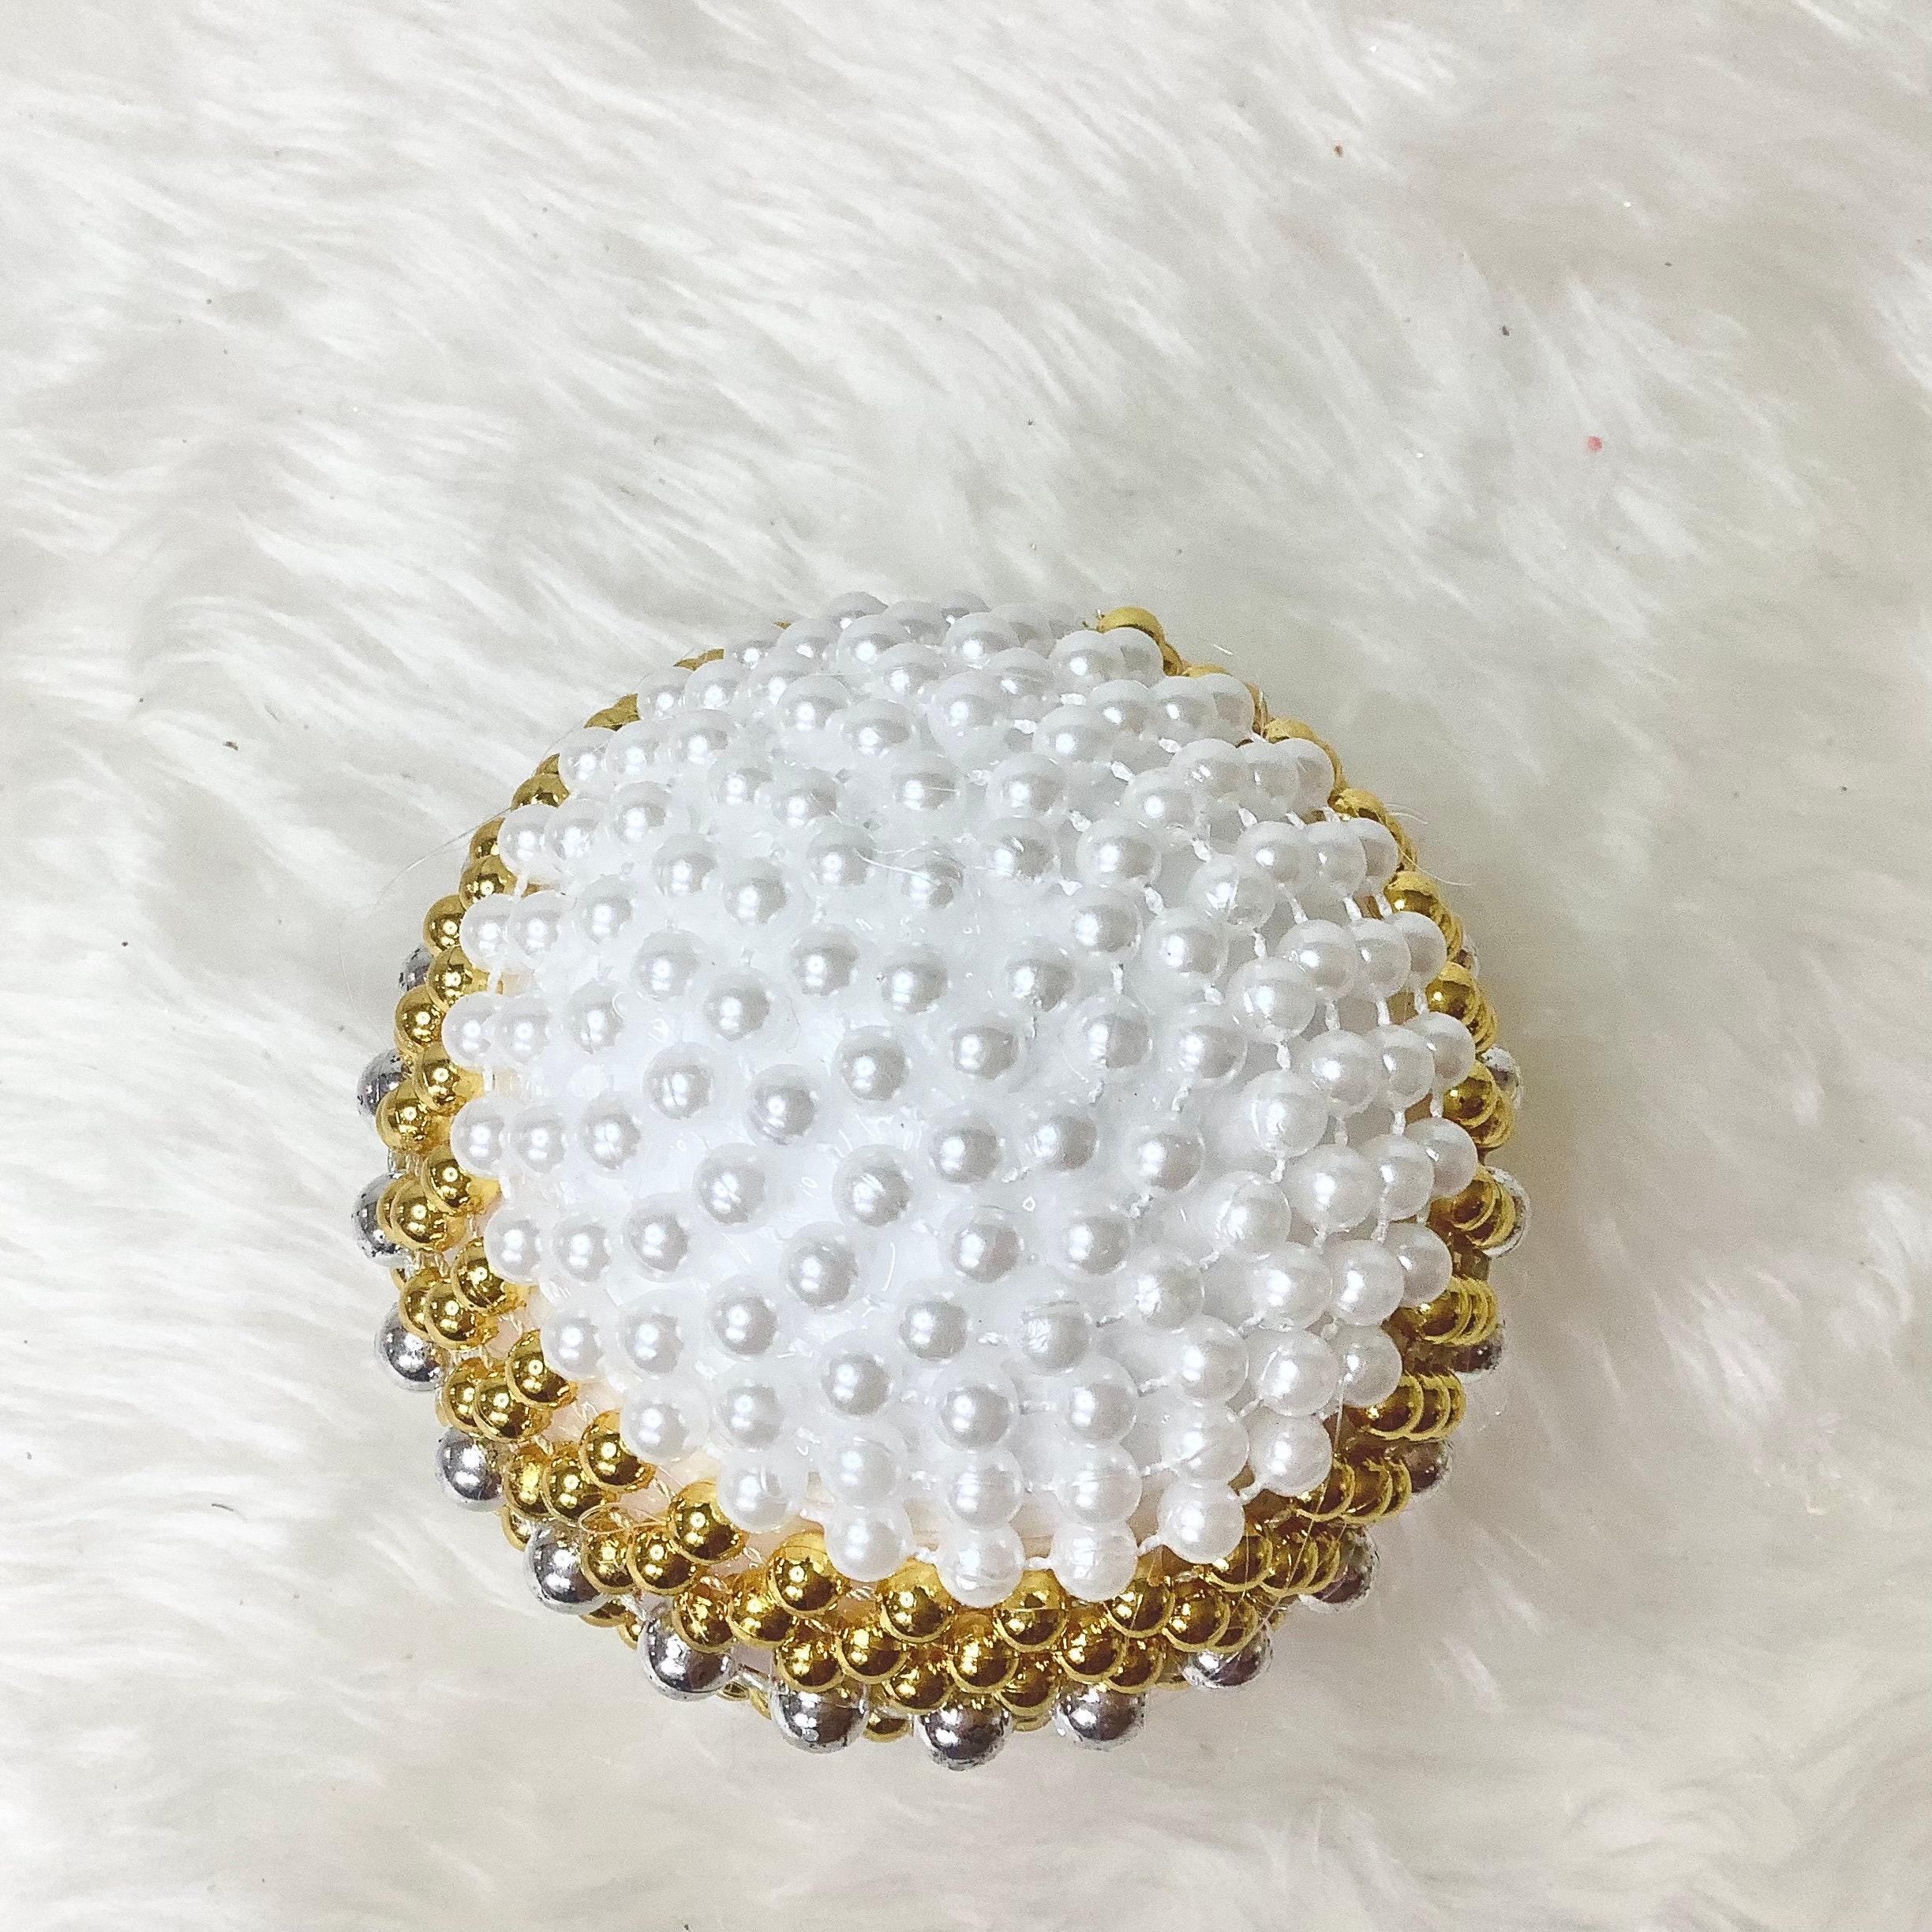 Pearl Decor Ball Bowl Filler, Pearl Ornament, Table Decoration, Gift for  Mother, Wedding Table Decor, White Home Decor 